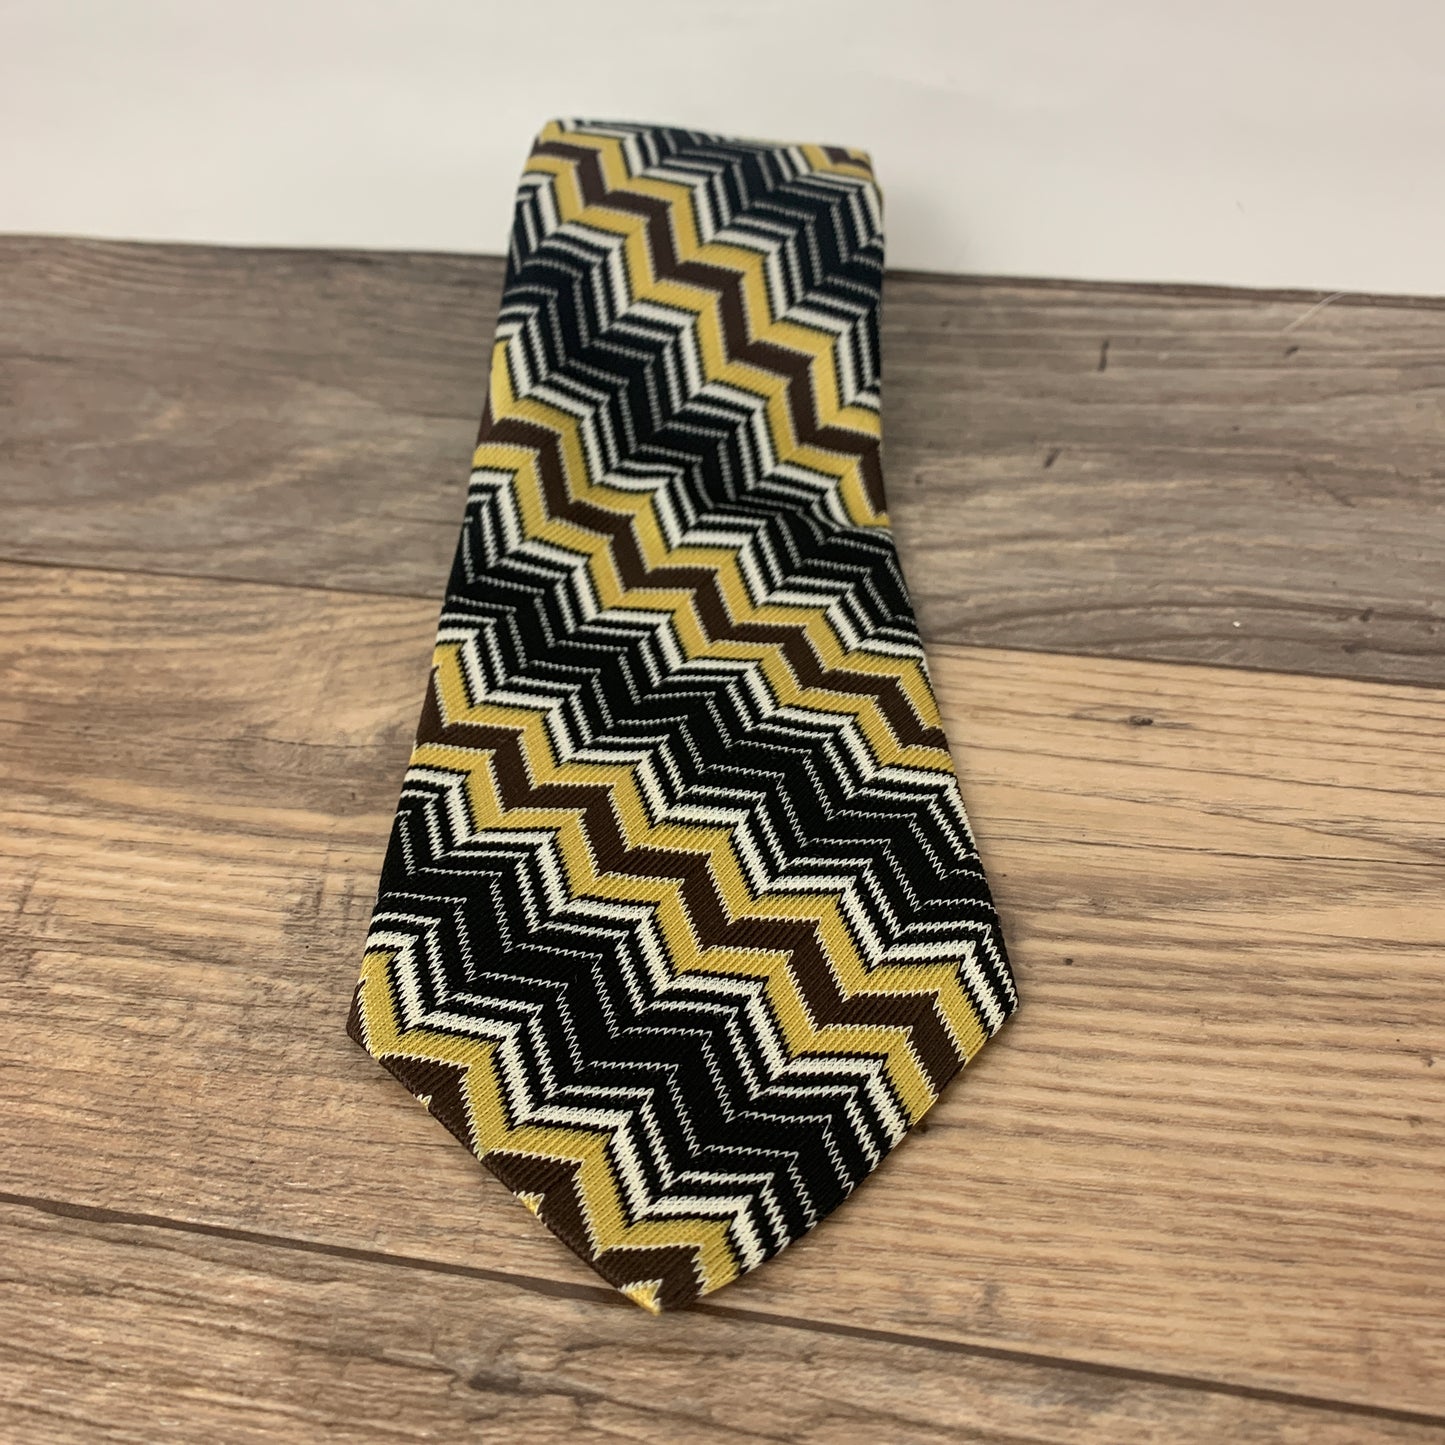 Vintage Polyester Tie with Geometric Design, Wide Tie with Zig Zag Patern